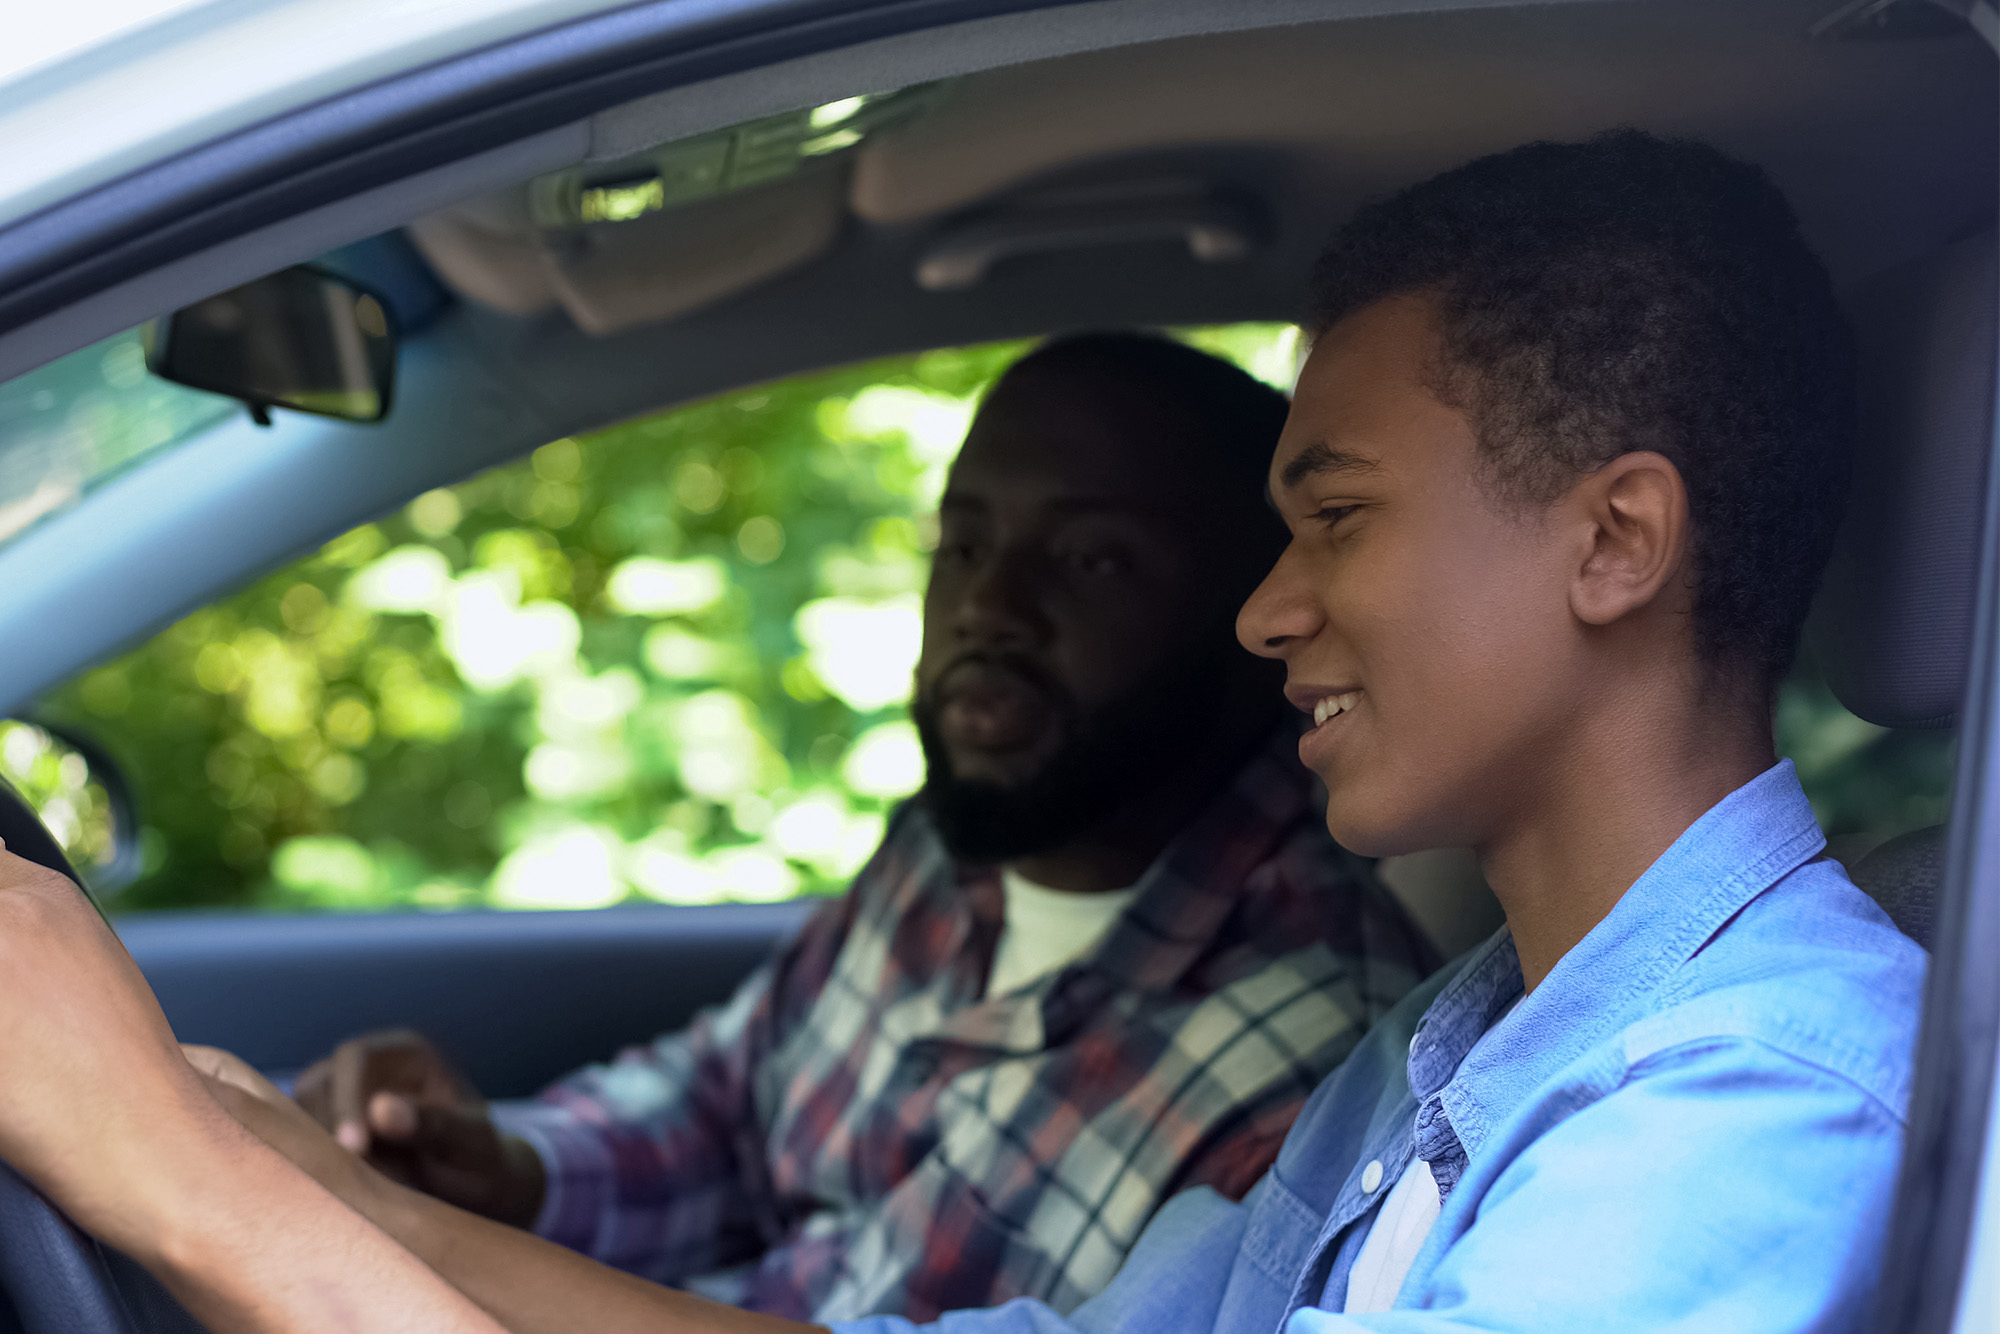 Teen Driver: A father and son sitting in the car.